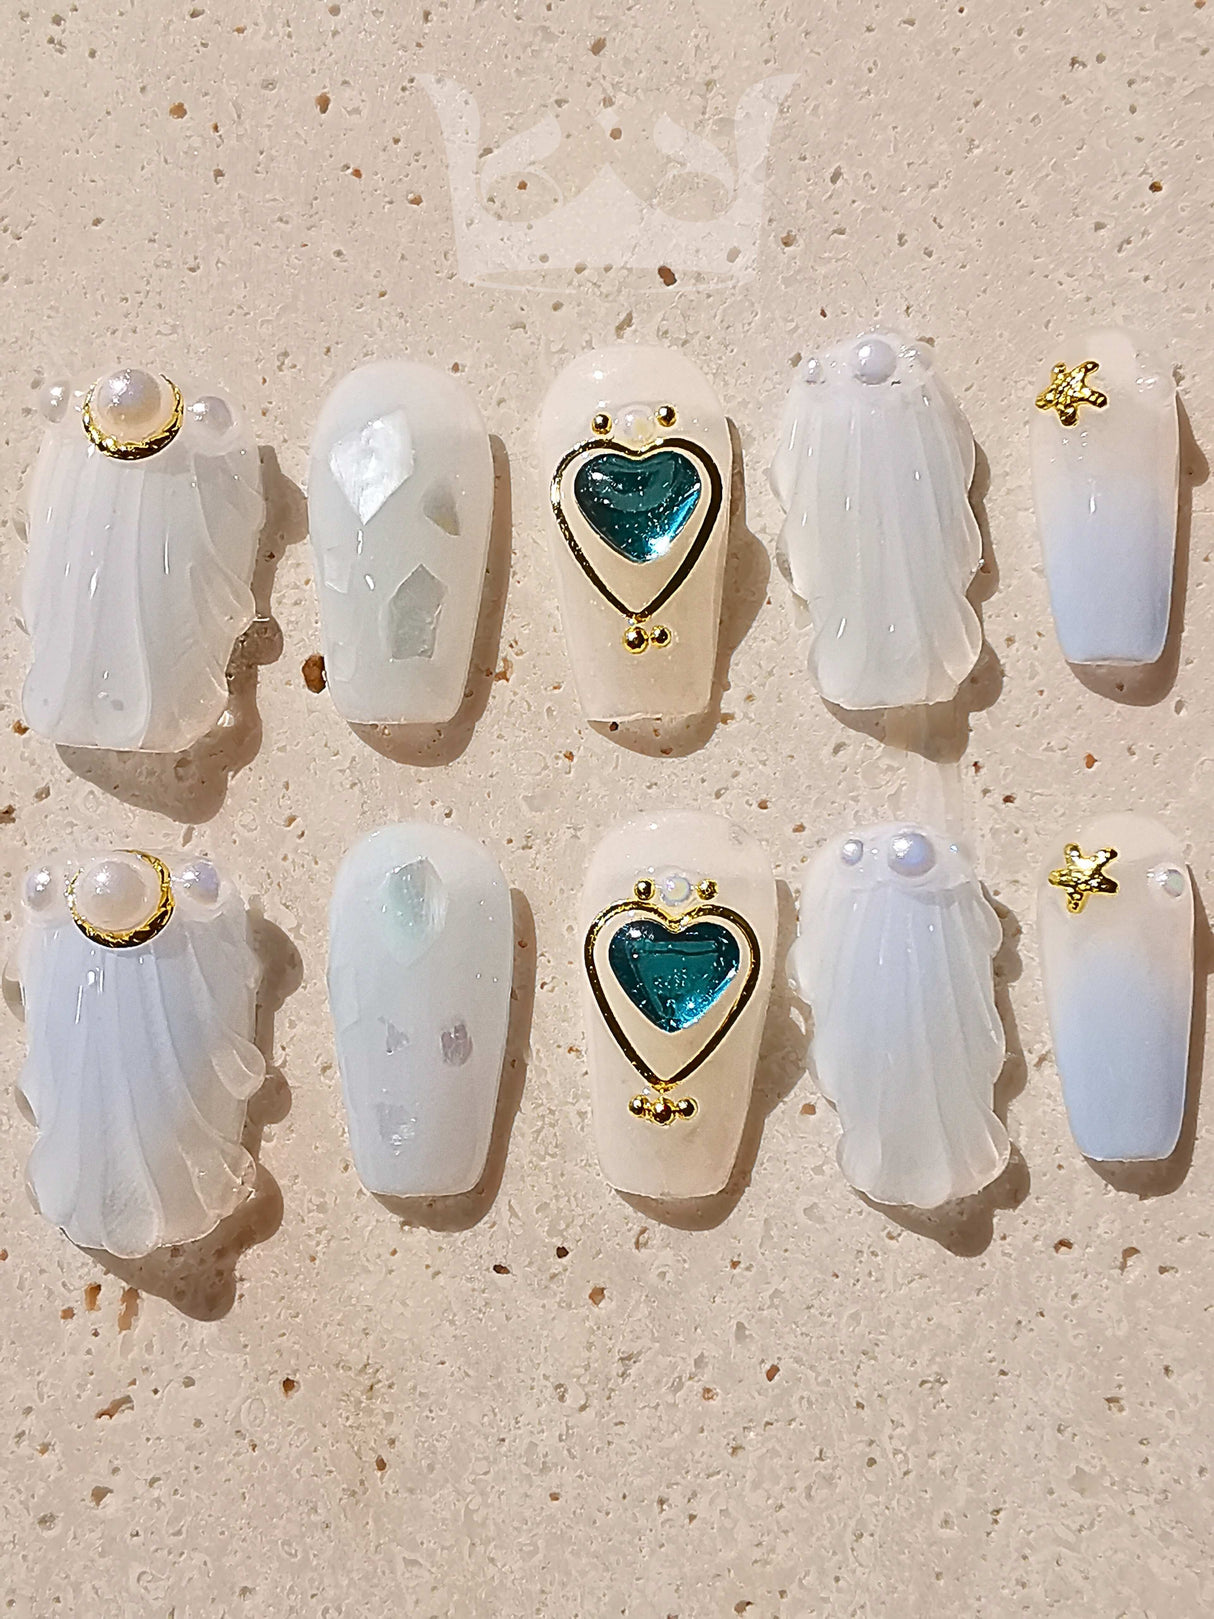 Luxury nail tips made of acrylic with white, semi-translucent appearance and cute elements like pearls, hearts, and stars. Ideal for special occasions.